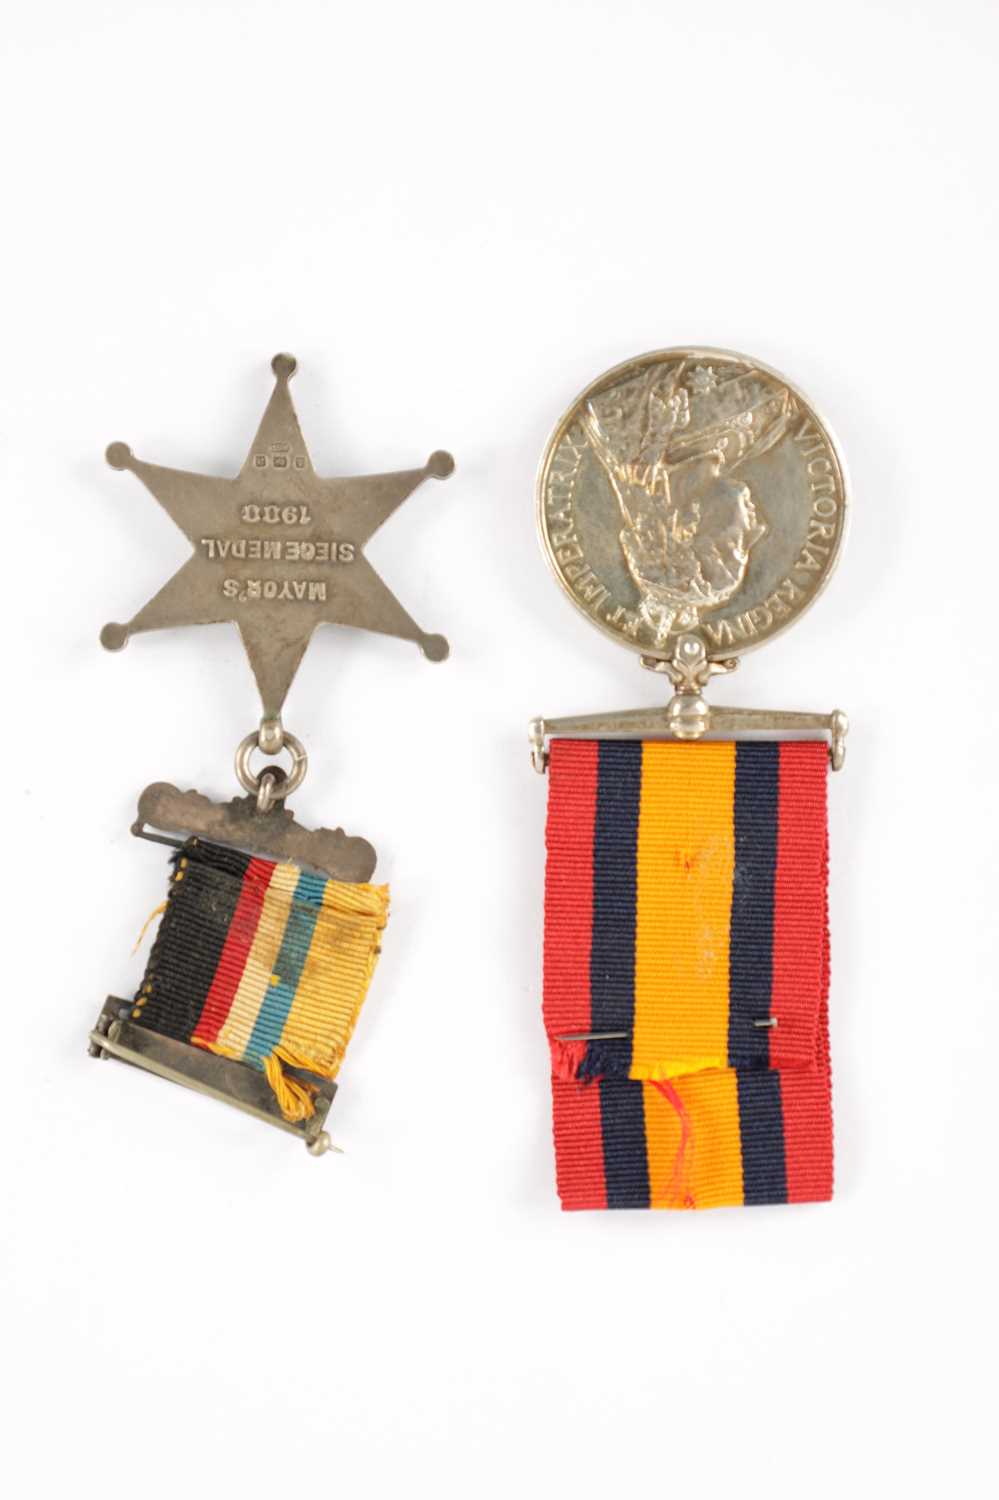 A SILVER KIMBERLEY STAR MEDAL AND A QUEENS SOUTH AFRICAN MEDAL - Image 6 of 9